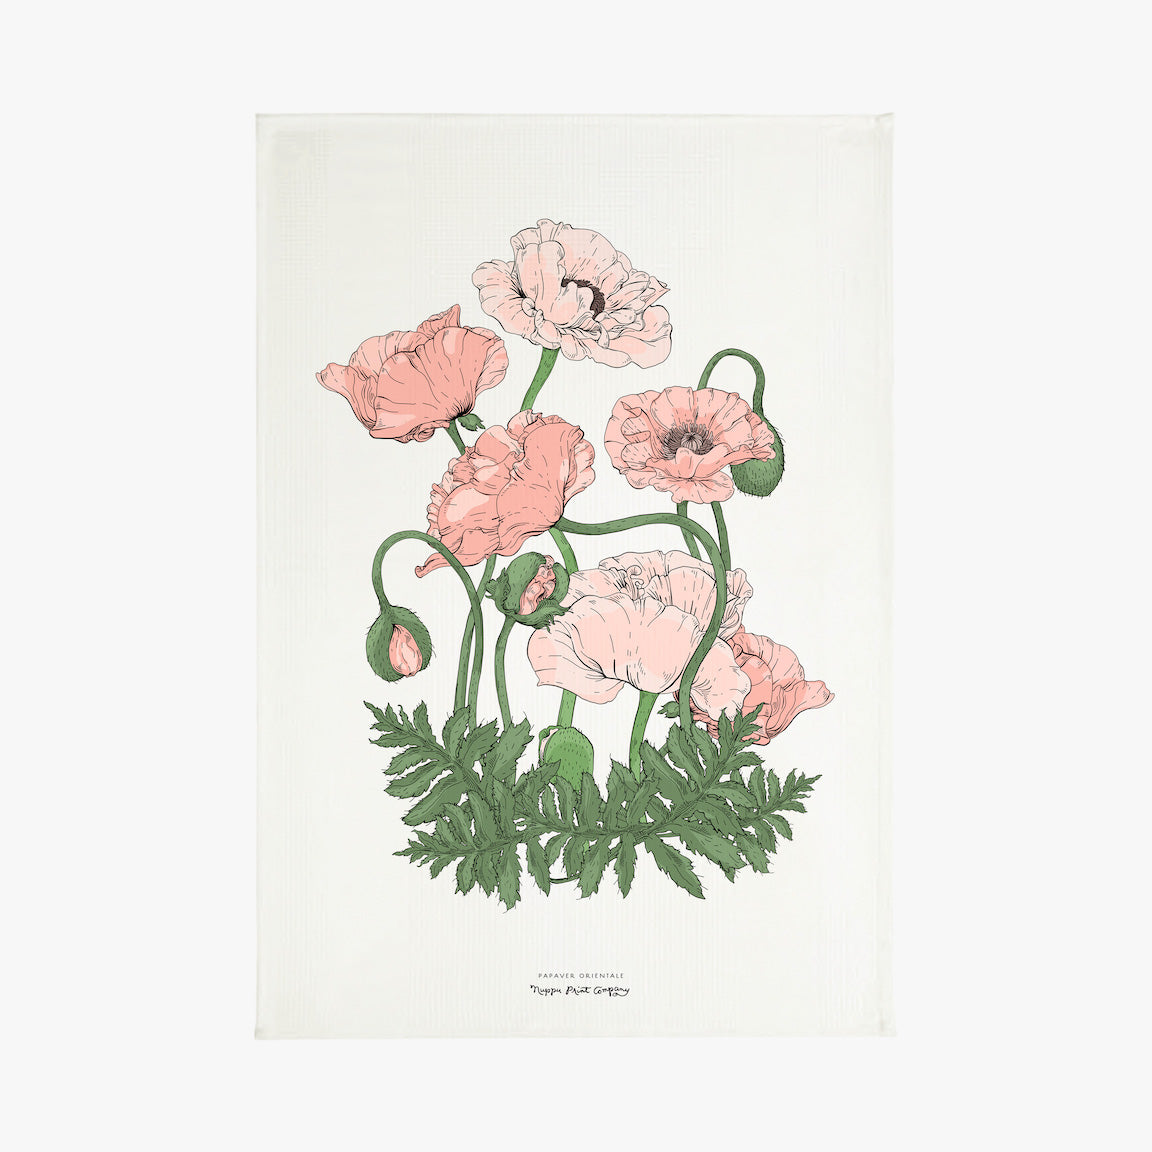 Image of white tea towel with several blush pink and light pink poppies in various stages of bloom with green stems and leaves.